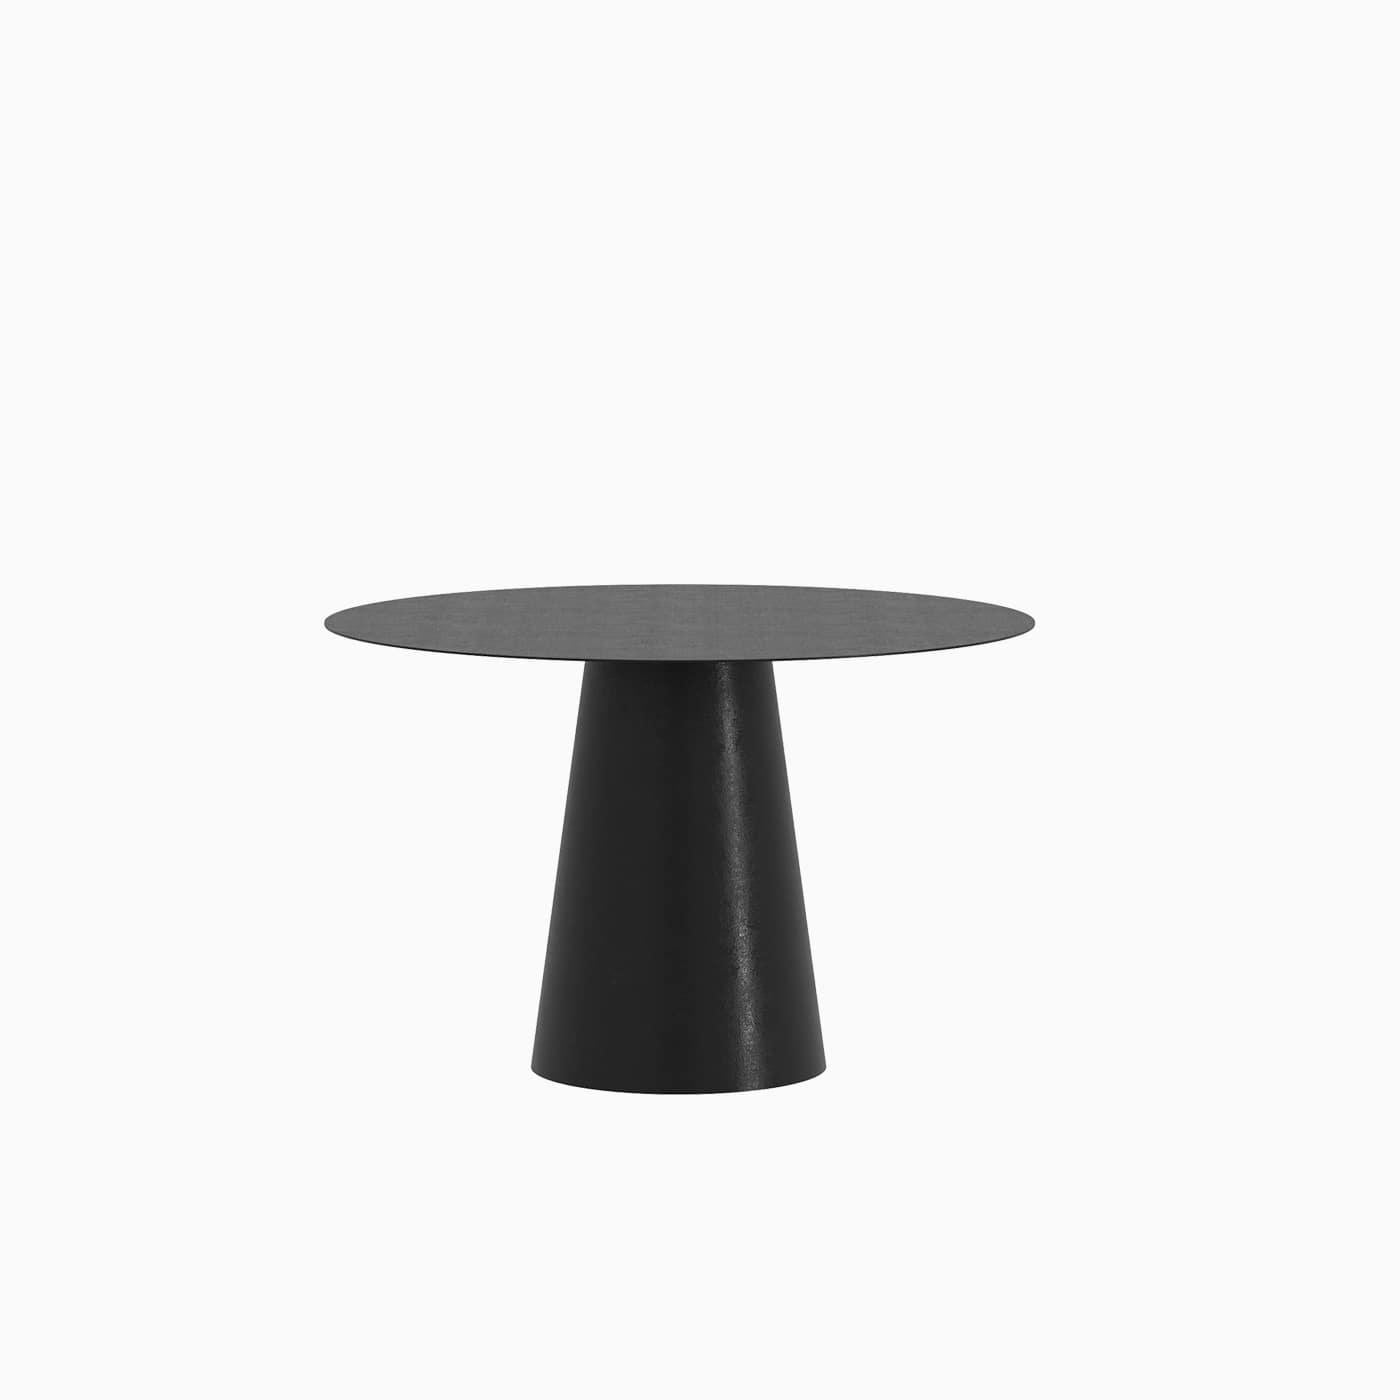 Mexican Conic Dining Table For Sale